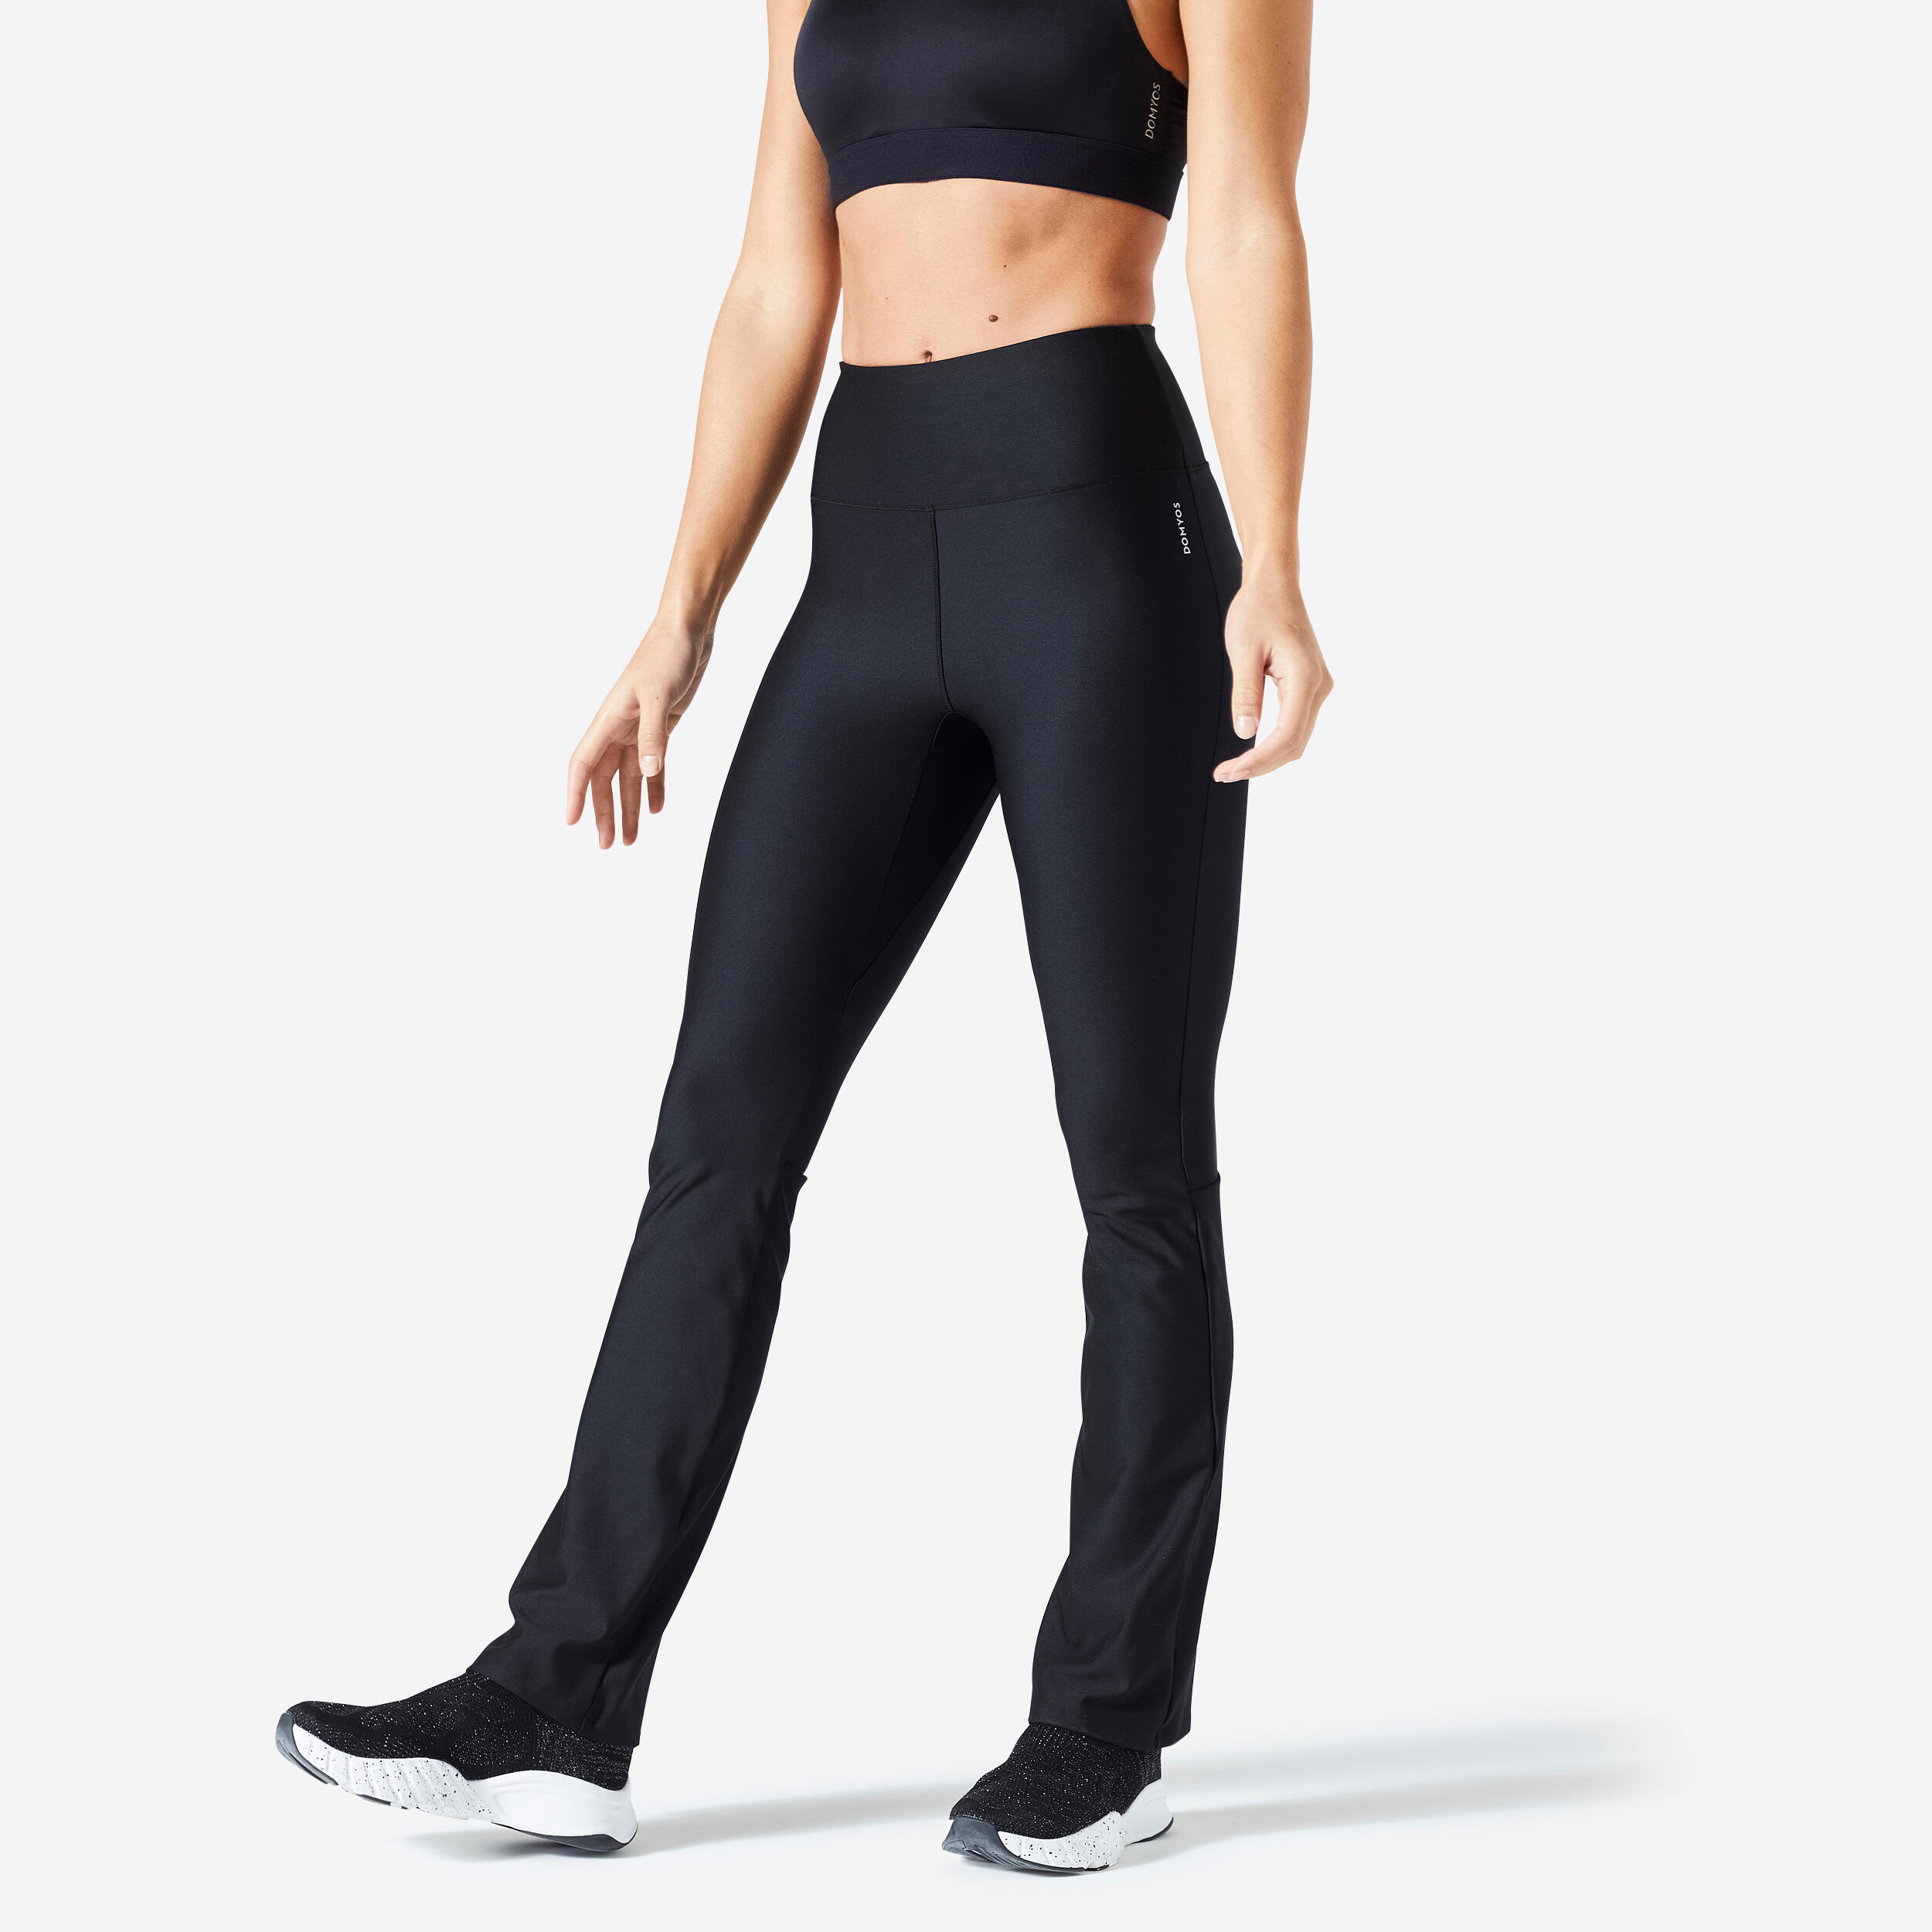 Buy Cicendy Womens Flare Leggings,Yoga Pants Casual Bootleg with Pockets  High Waisted Stretchy Control Gym Workout Work Pants, Black, XS at Amazon.in